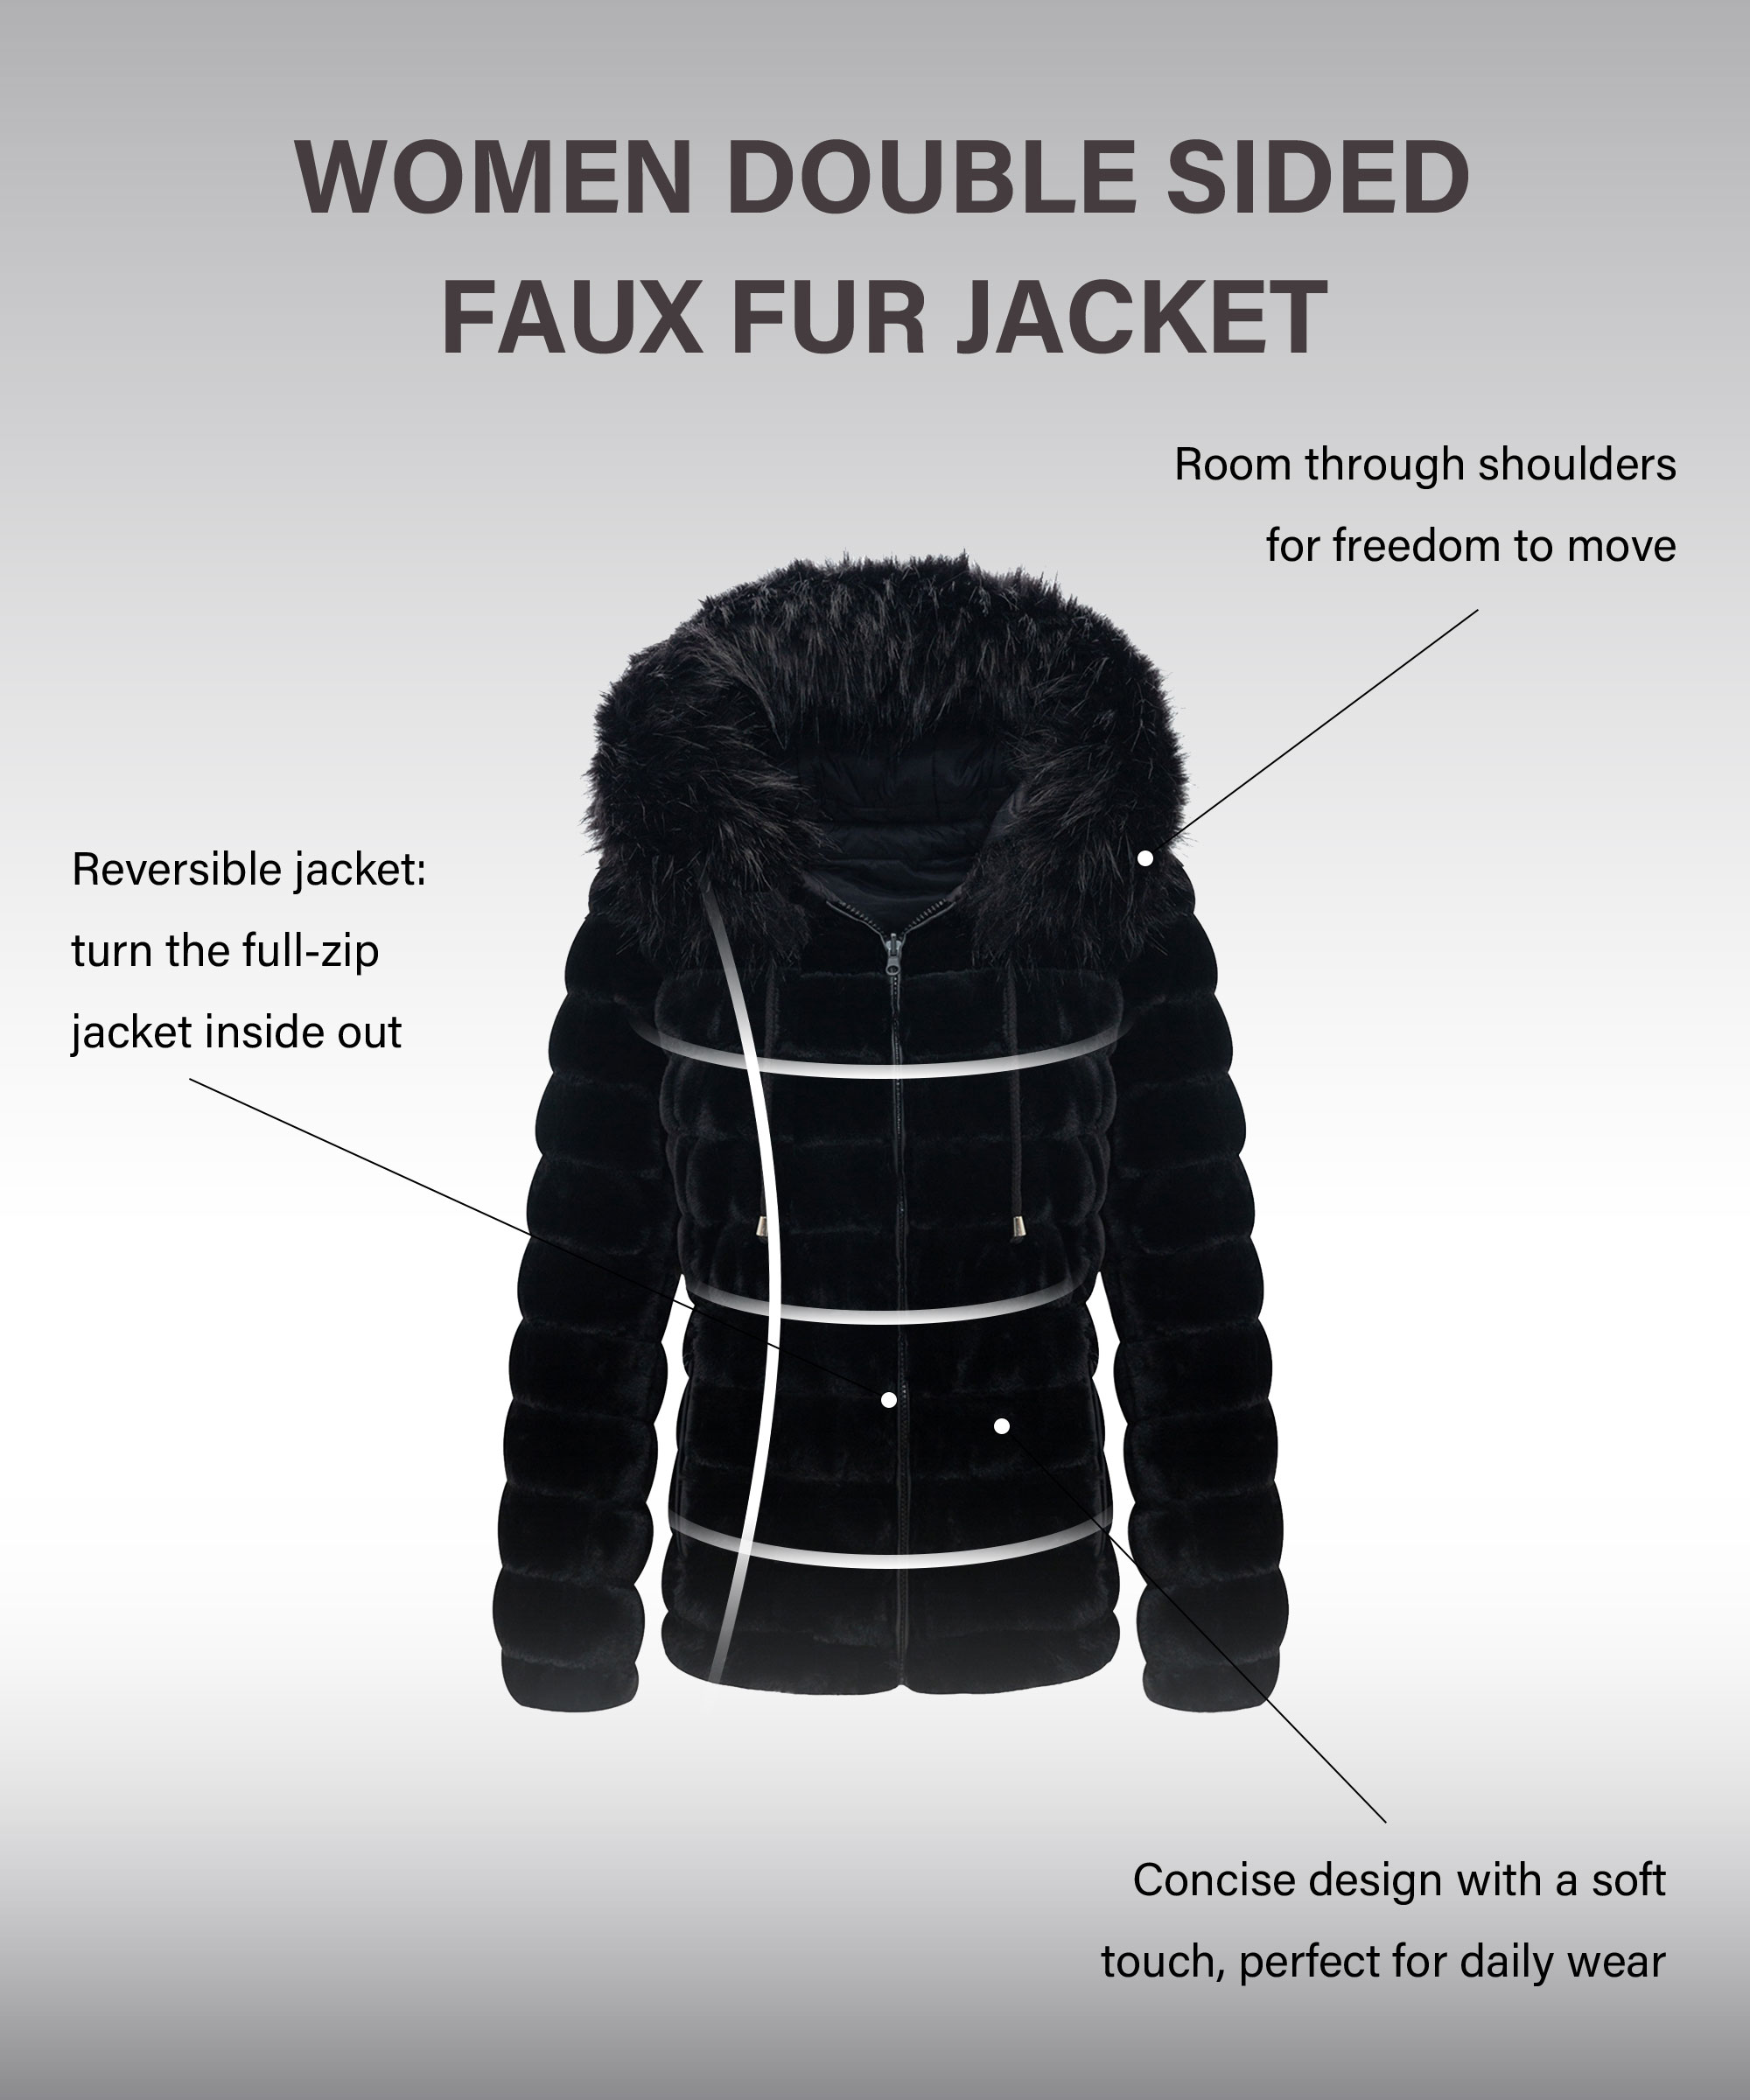 Giolshon Women's Double Sided Puffer Coats Faux Fur Jacket with Fur Collar Fall and Winter - image 3 of 6